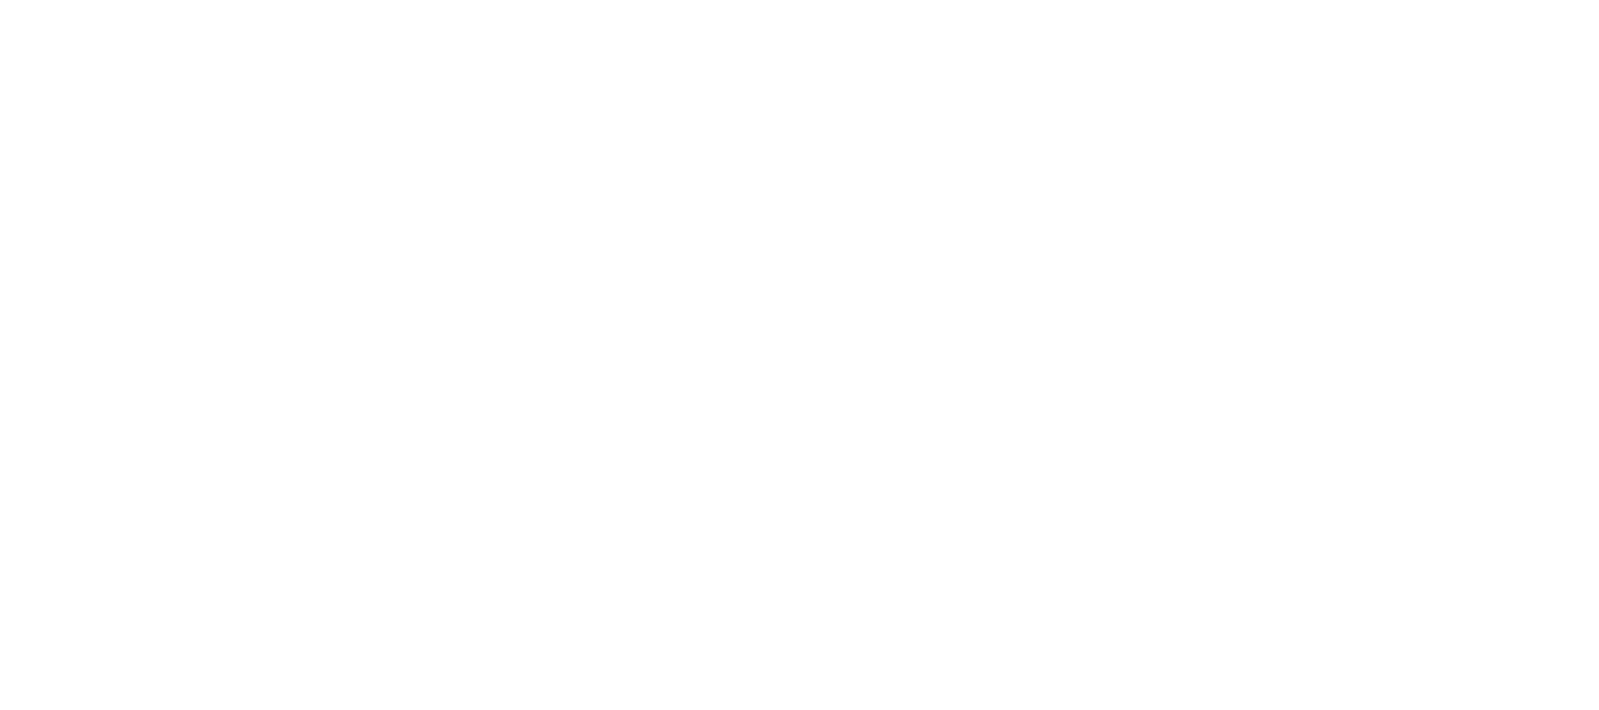 Retail Opportunity Investments logo large for dark backgrounds (transparent PNG)